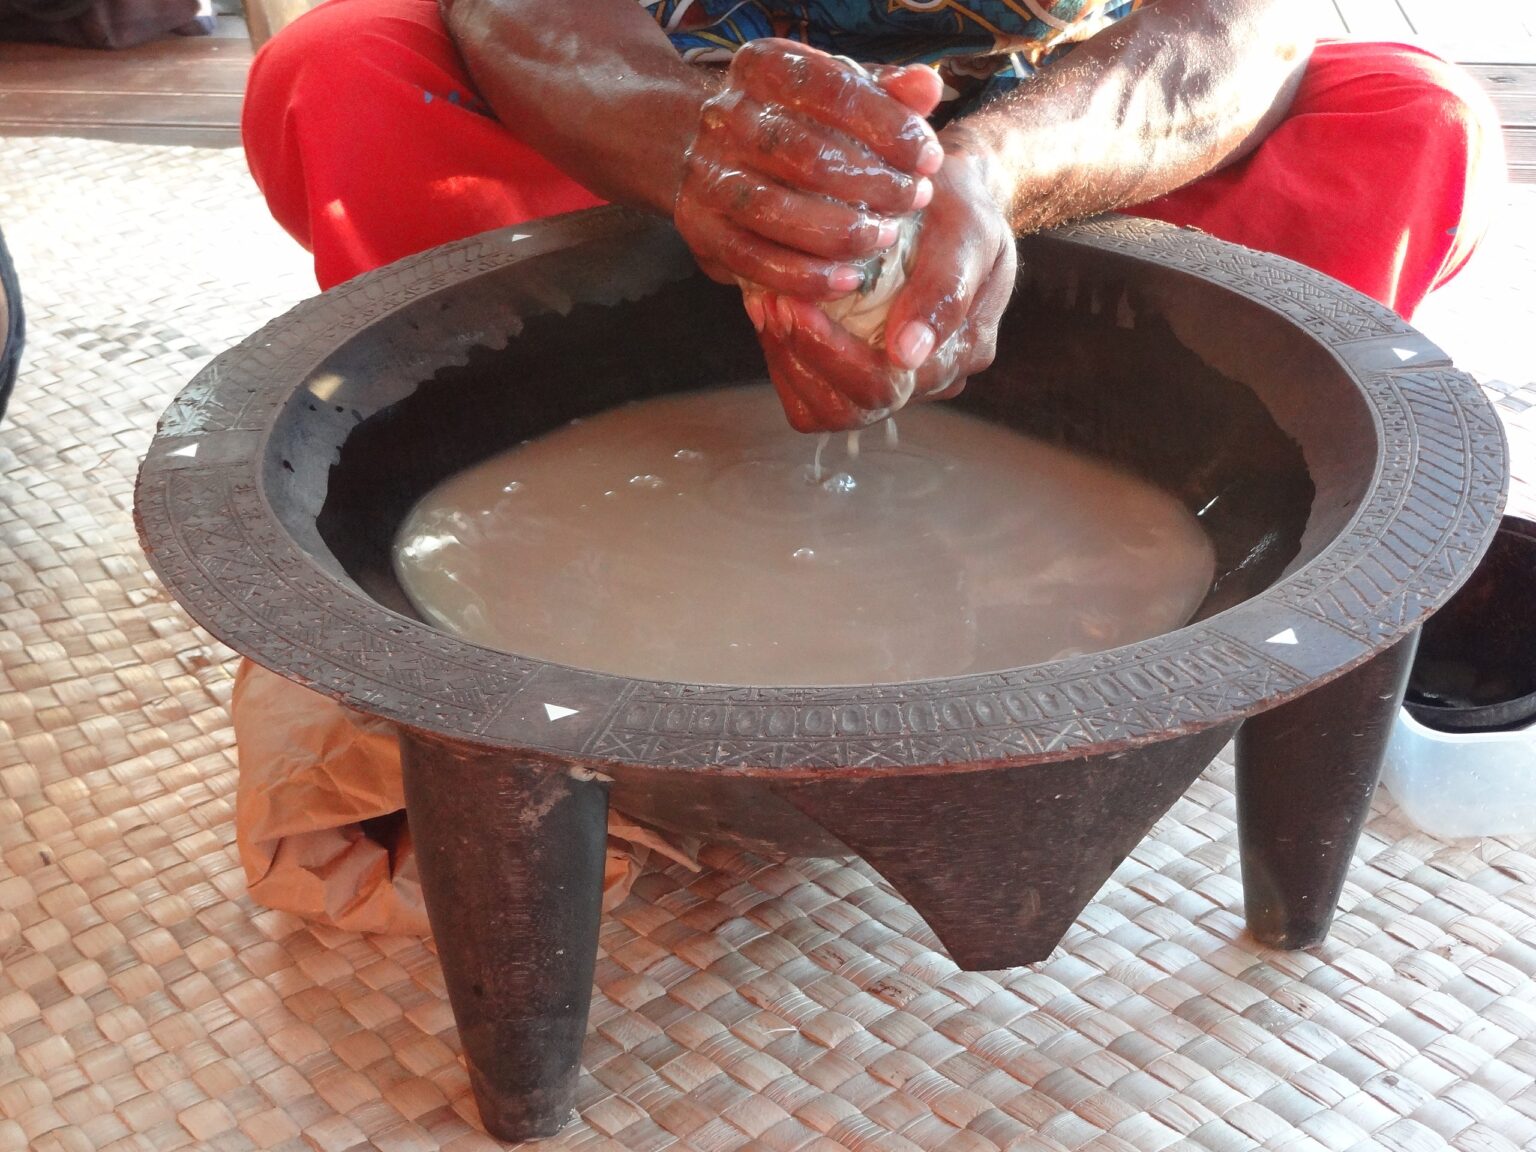 Tripping on Kava, the 3,000 Year Old Fijian Psychoactive Drug